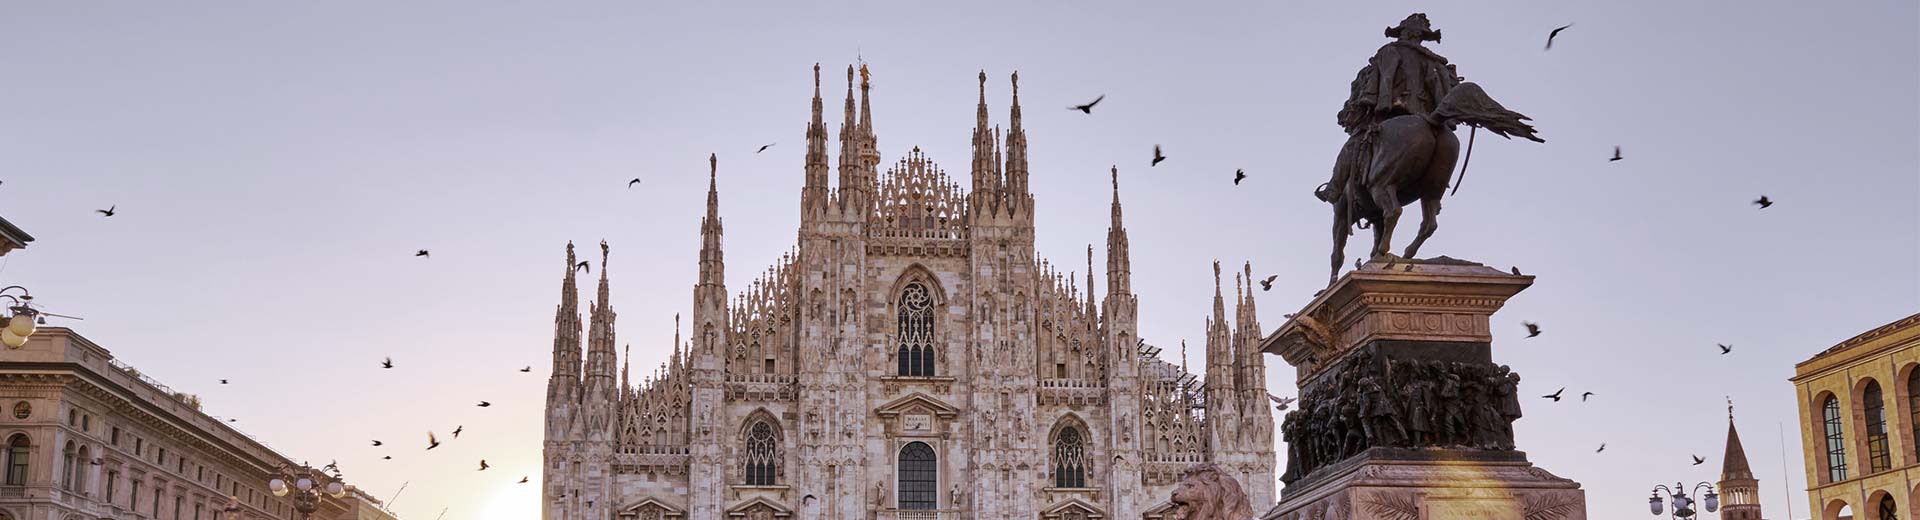 The beautiful cathedral of Milan, with the sun setting in the background.